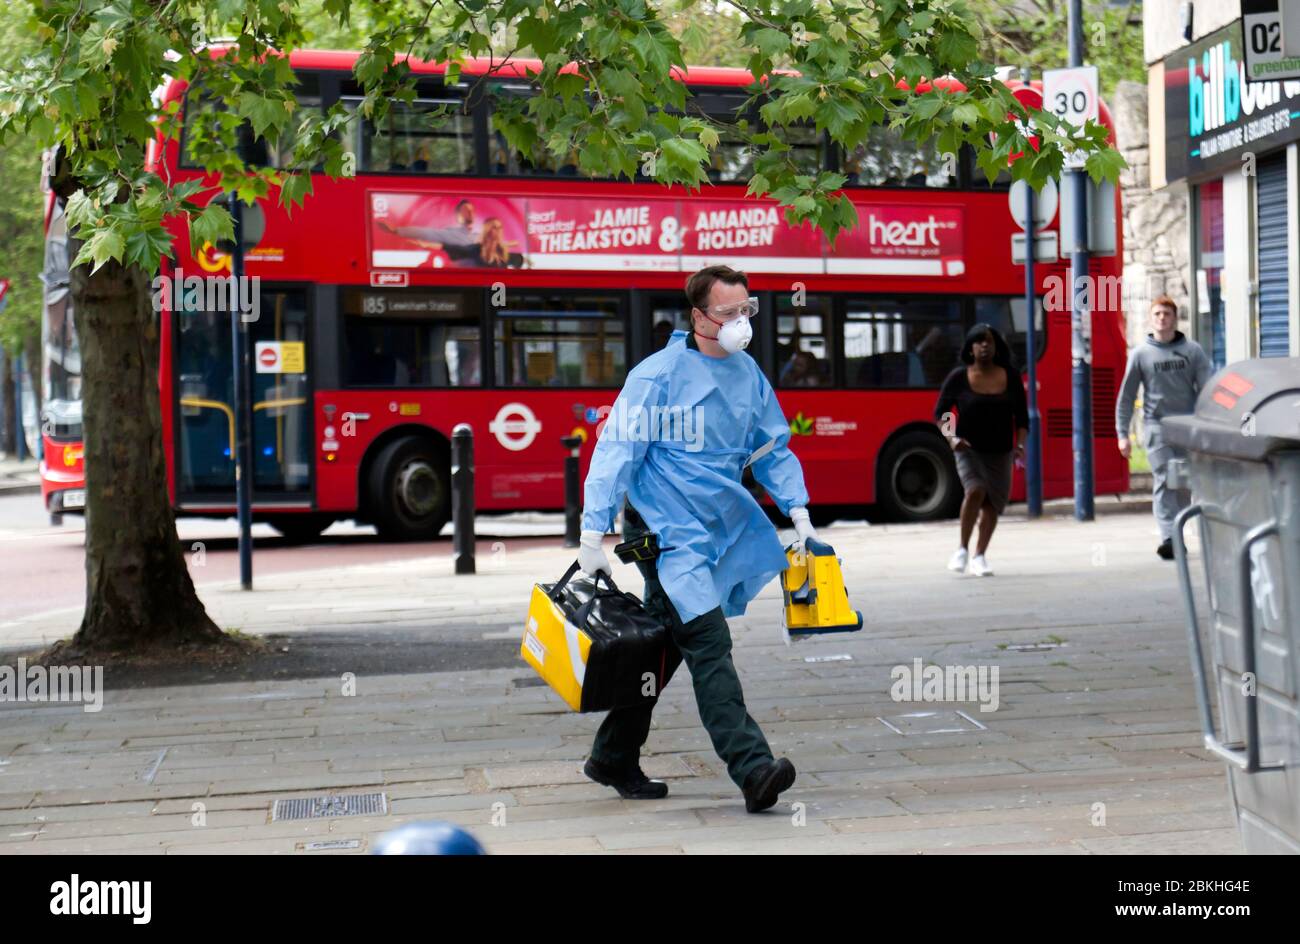 London Ambulance Crewmember, dressed in Personal Protective Equipment, arrives in Lewisham Hight Street, to attend a medical emergency, during the COVID-19 Pandemic Stock Photo